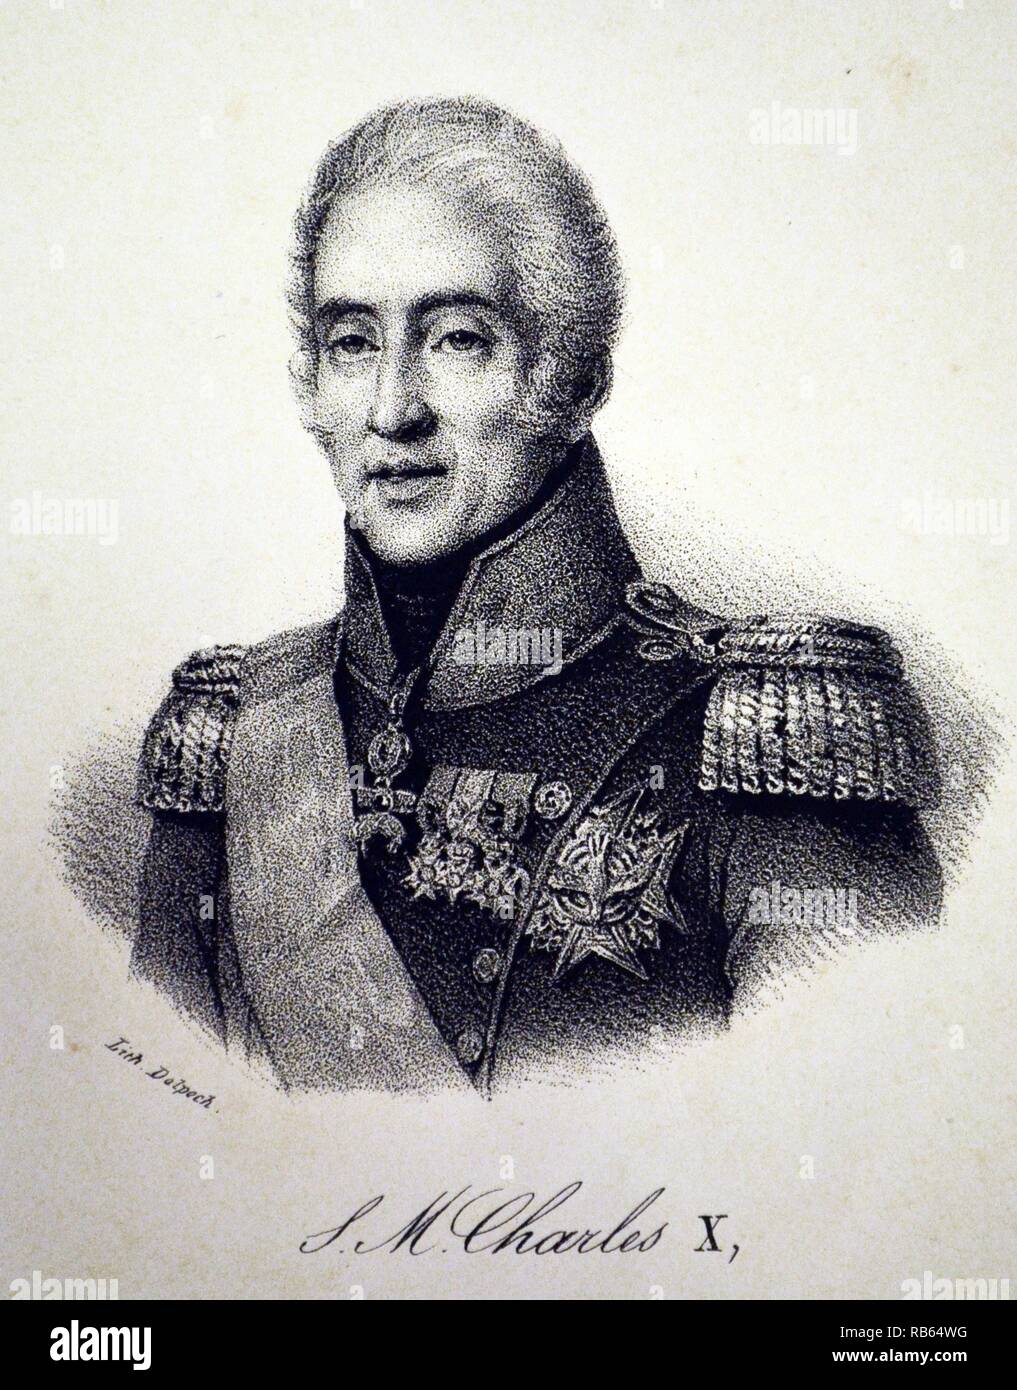 Charles X of France (1757-1836) King of France from 1824 until his abdication in the July Revolution of 1830. Lithograph, Paris, c1840. Stock Photo